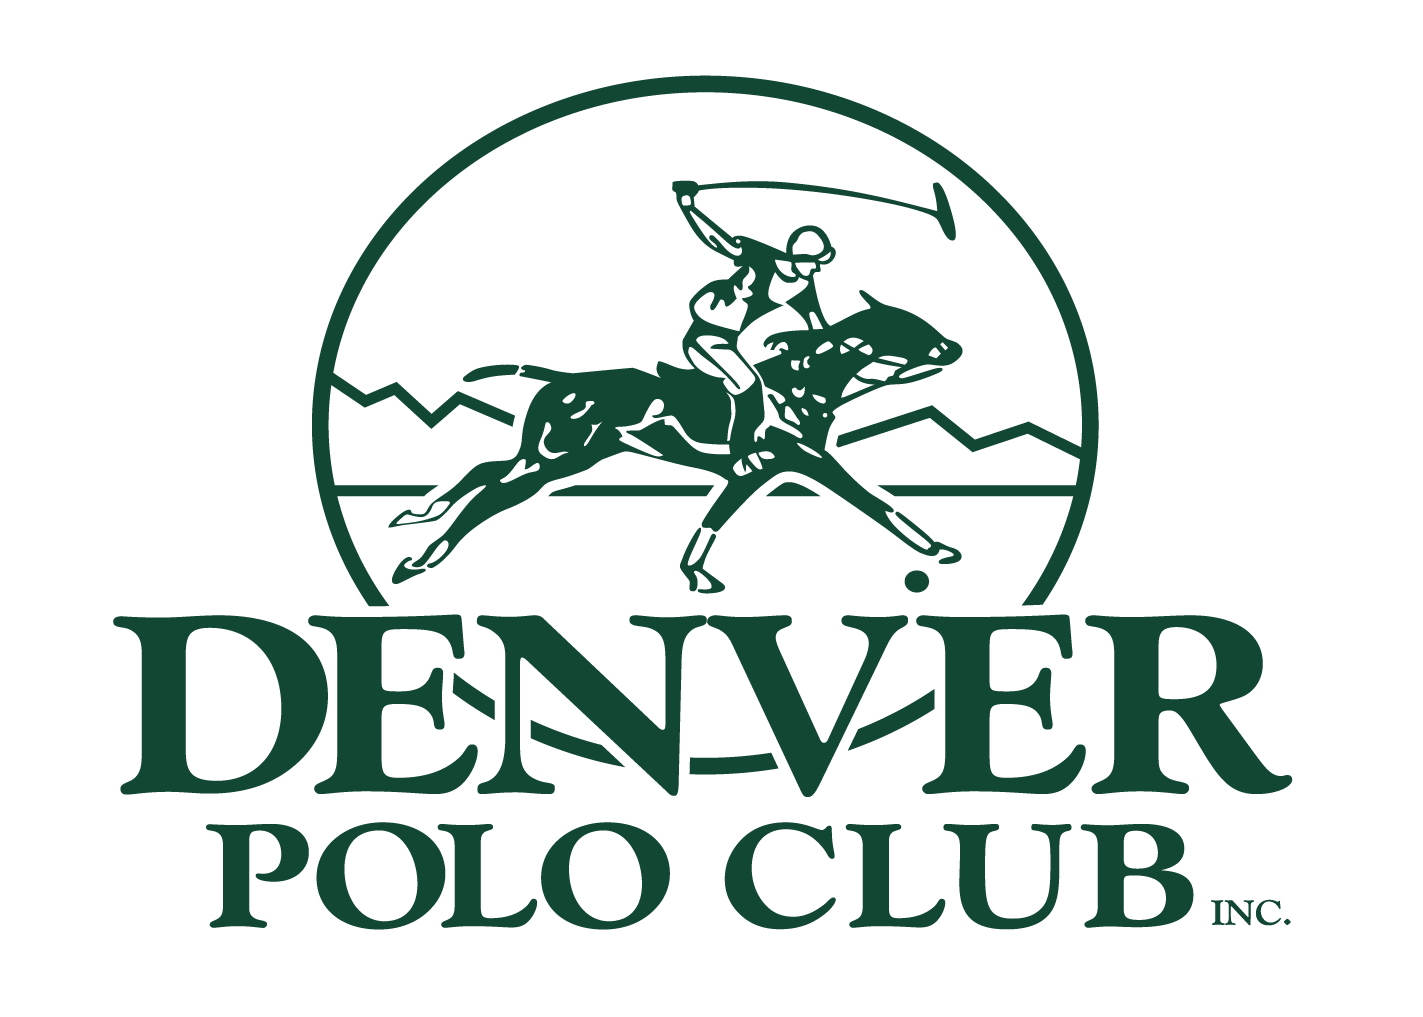 May 31 to Jun 2 Celebration of the Horse Fri, May 31, 2019 5:00 PM17:00 Sun, Jun 2, 2019 10:00 AM10:00 Google Calendar ICS For decades, the Denver Polo Club has been home to ALL types of equine disciplines. This weekend we are partnering with Rocky Mountain Alliance Children's Foundation to host equ...